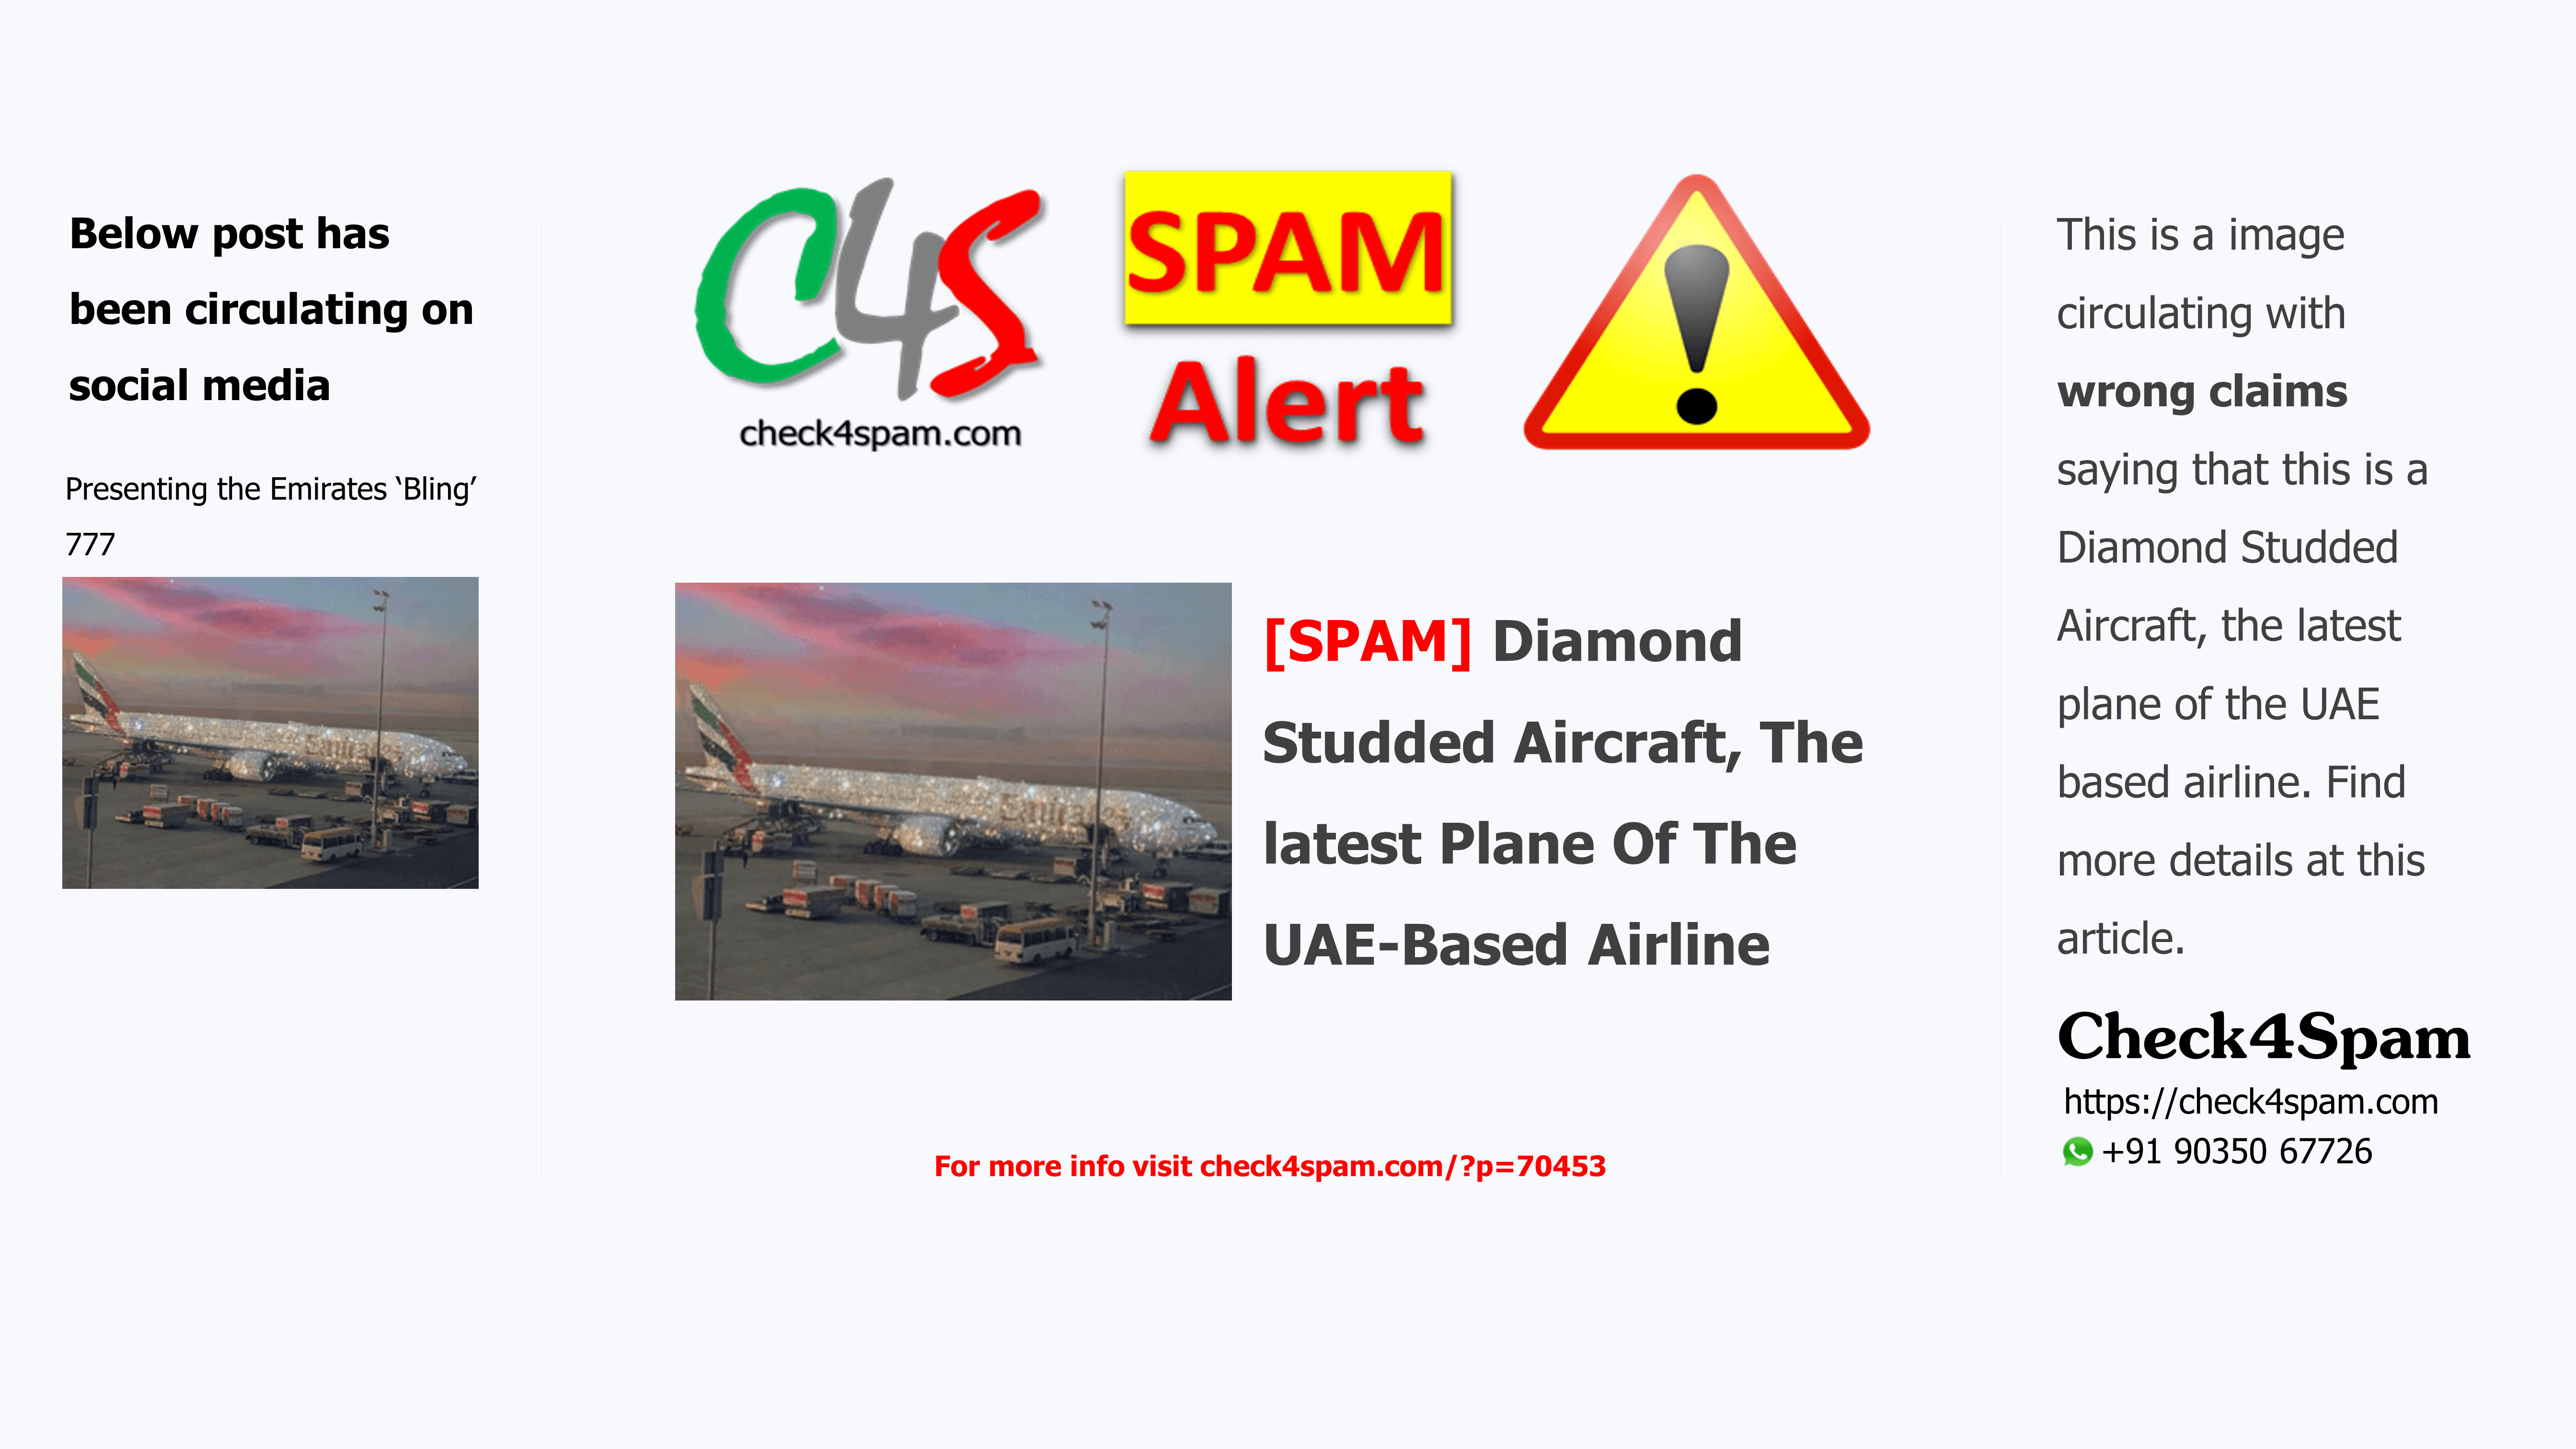 [SPAM] Diamond Studded Aircraft, The latest Plane Of The UAE-Based Airline